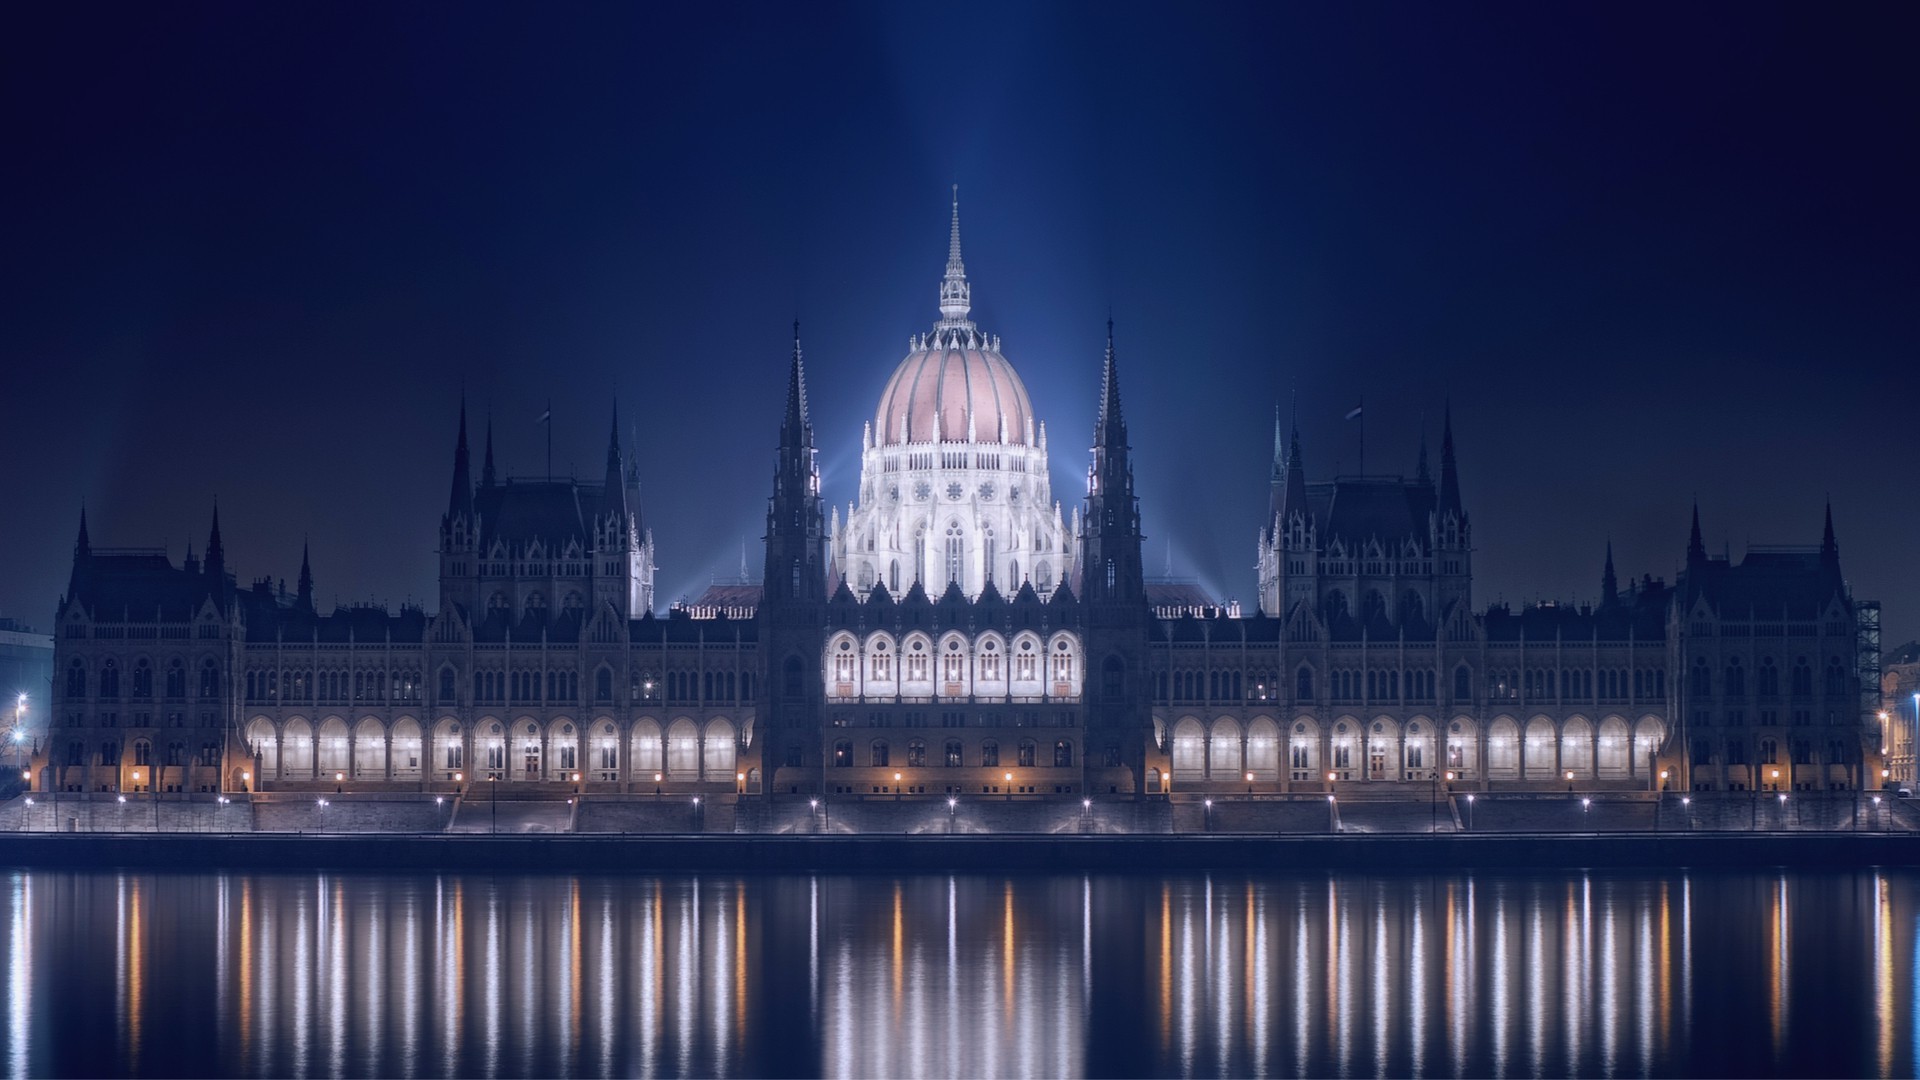 architecture, Cityscape, City, Building, Night, Lights, Budapest, Hungary, River, Old Building, Reflection, Water, Hungarian Parliament Building, Europe Wallpaper